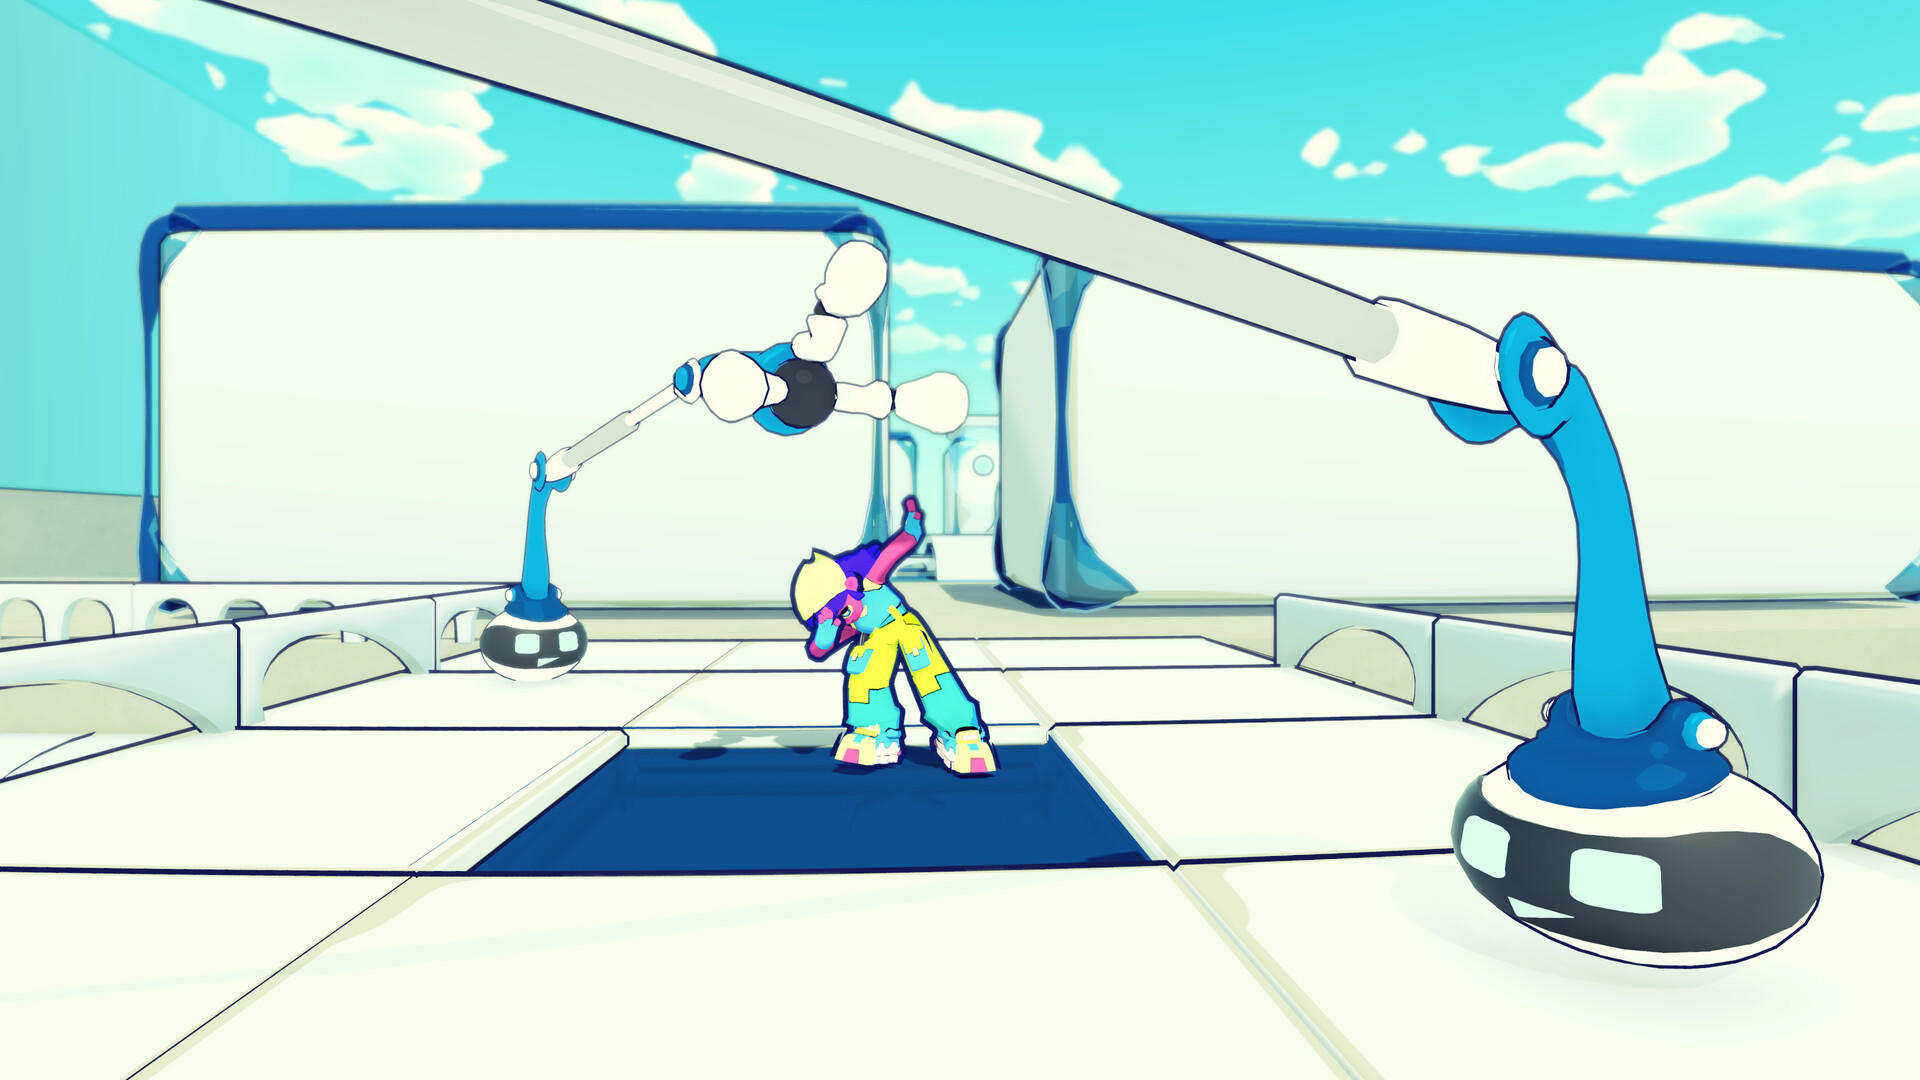 All Systems Dance screenshot game